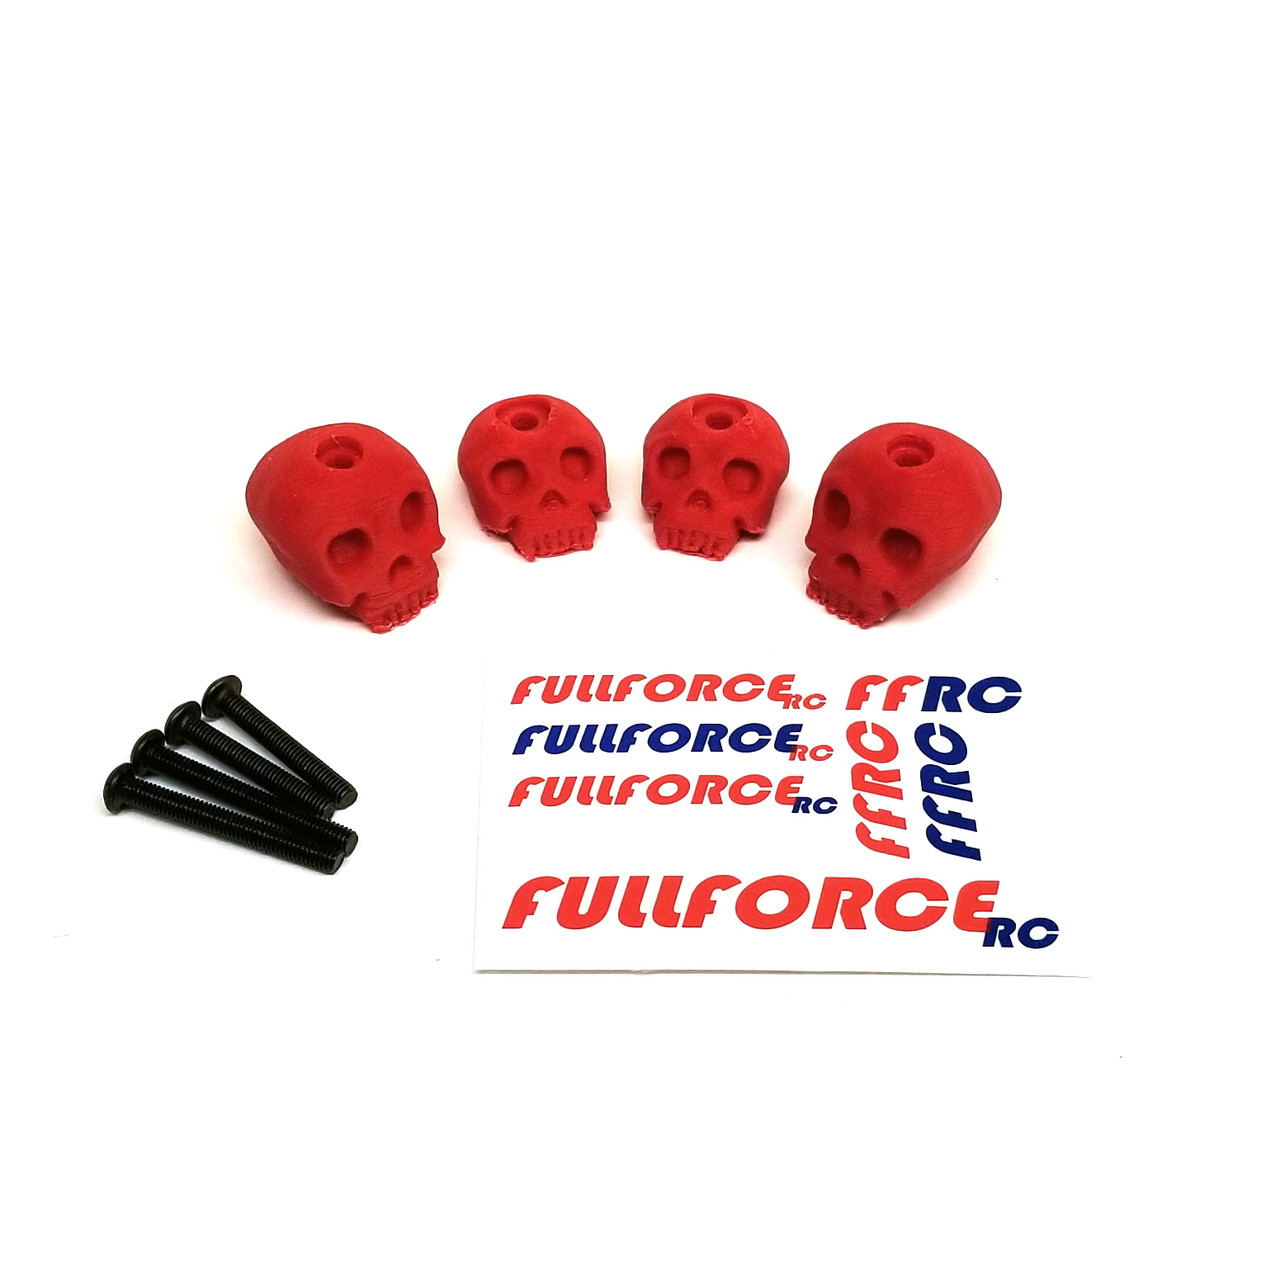 FOR Traxxas X-MAXX Custom 3D printed skull body washers by Fullforce RC.  Complete with hardware.  4 PACK Red version.